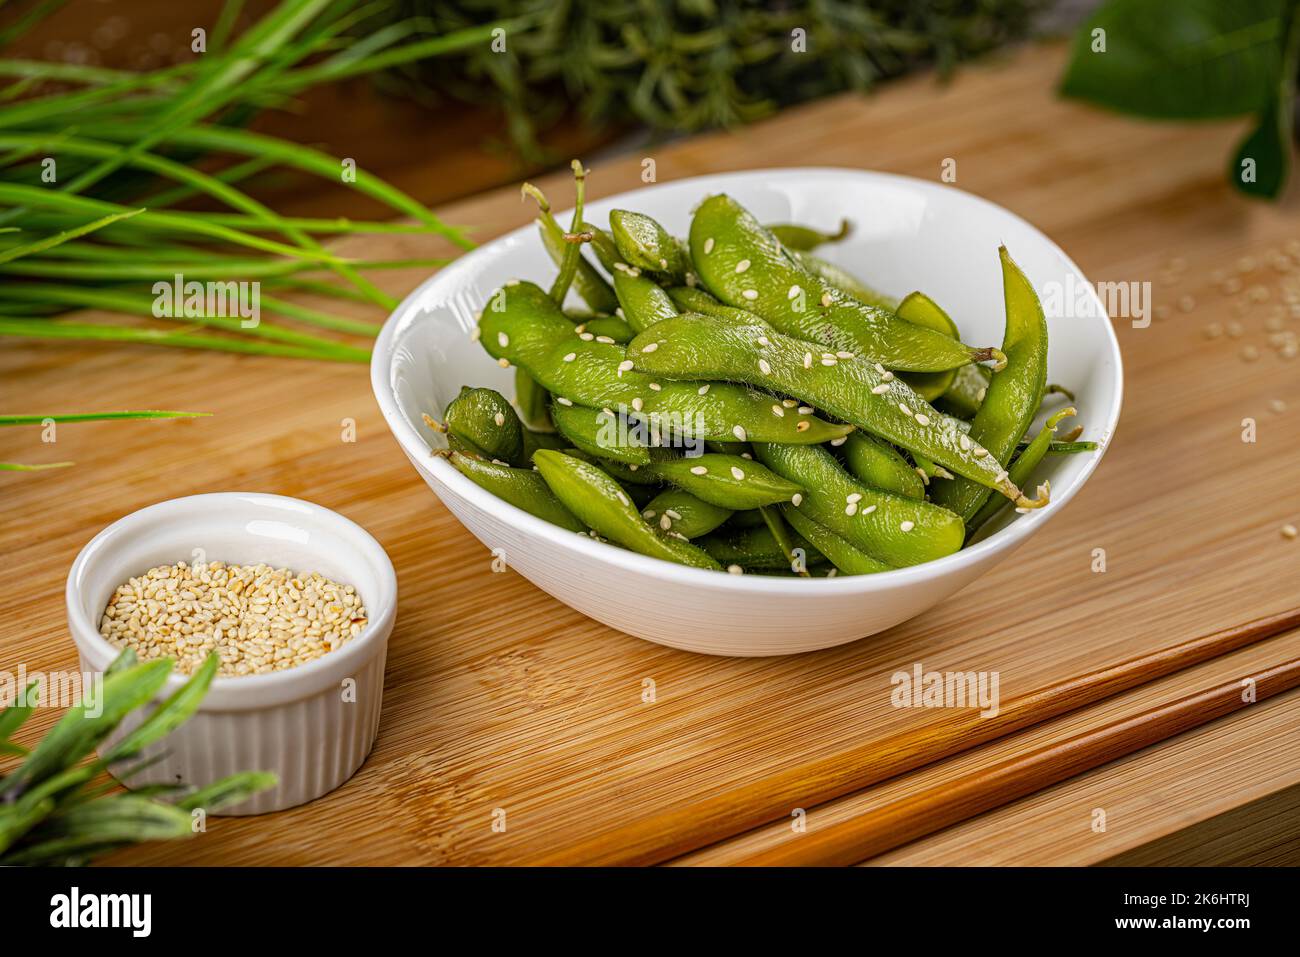 Green pea pods with sesame seeds. Diet food concept Stock Photo